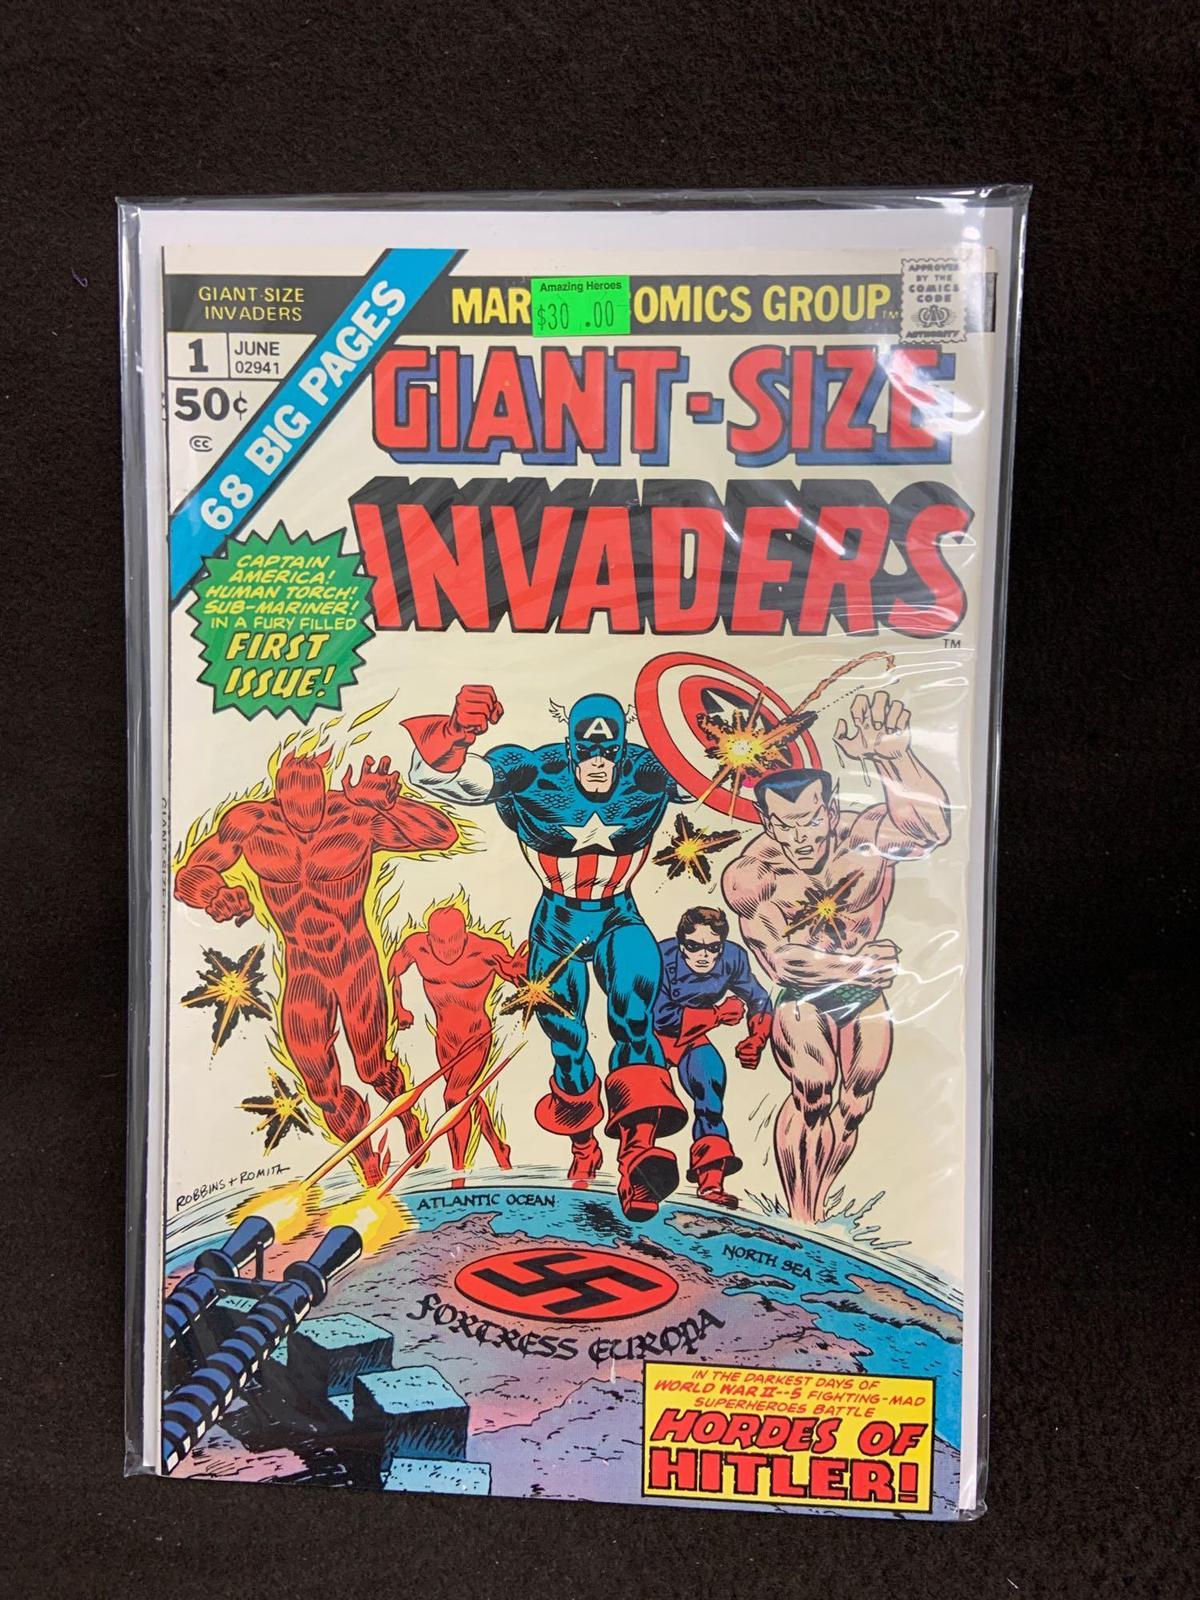 Giant Size Invaders #1 Vintage Comic Book from Amazing Collection